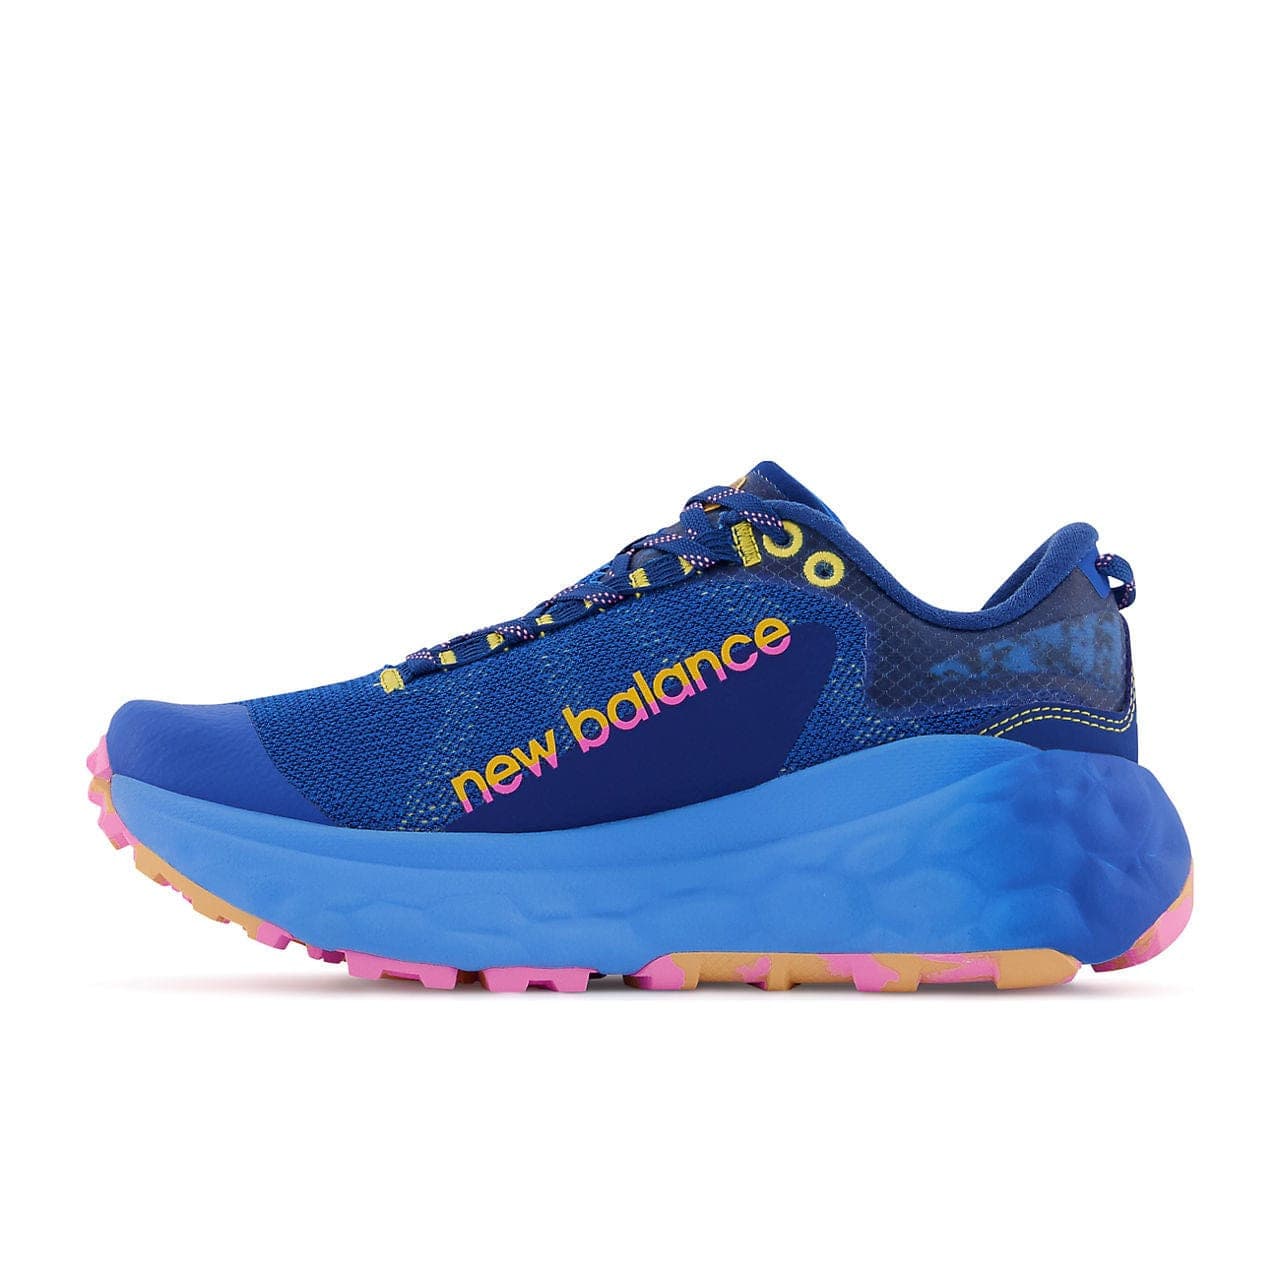 New Balance Fresh Foam X More Trail v2 (Women's) - Blue with vibrant apricot and vibrant pink